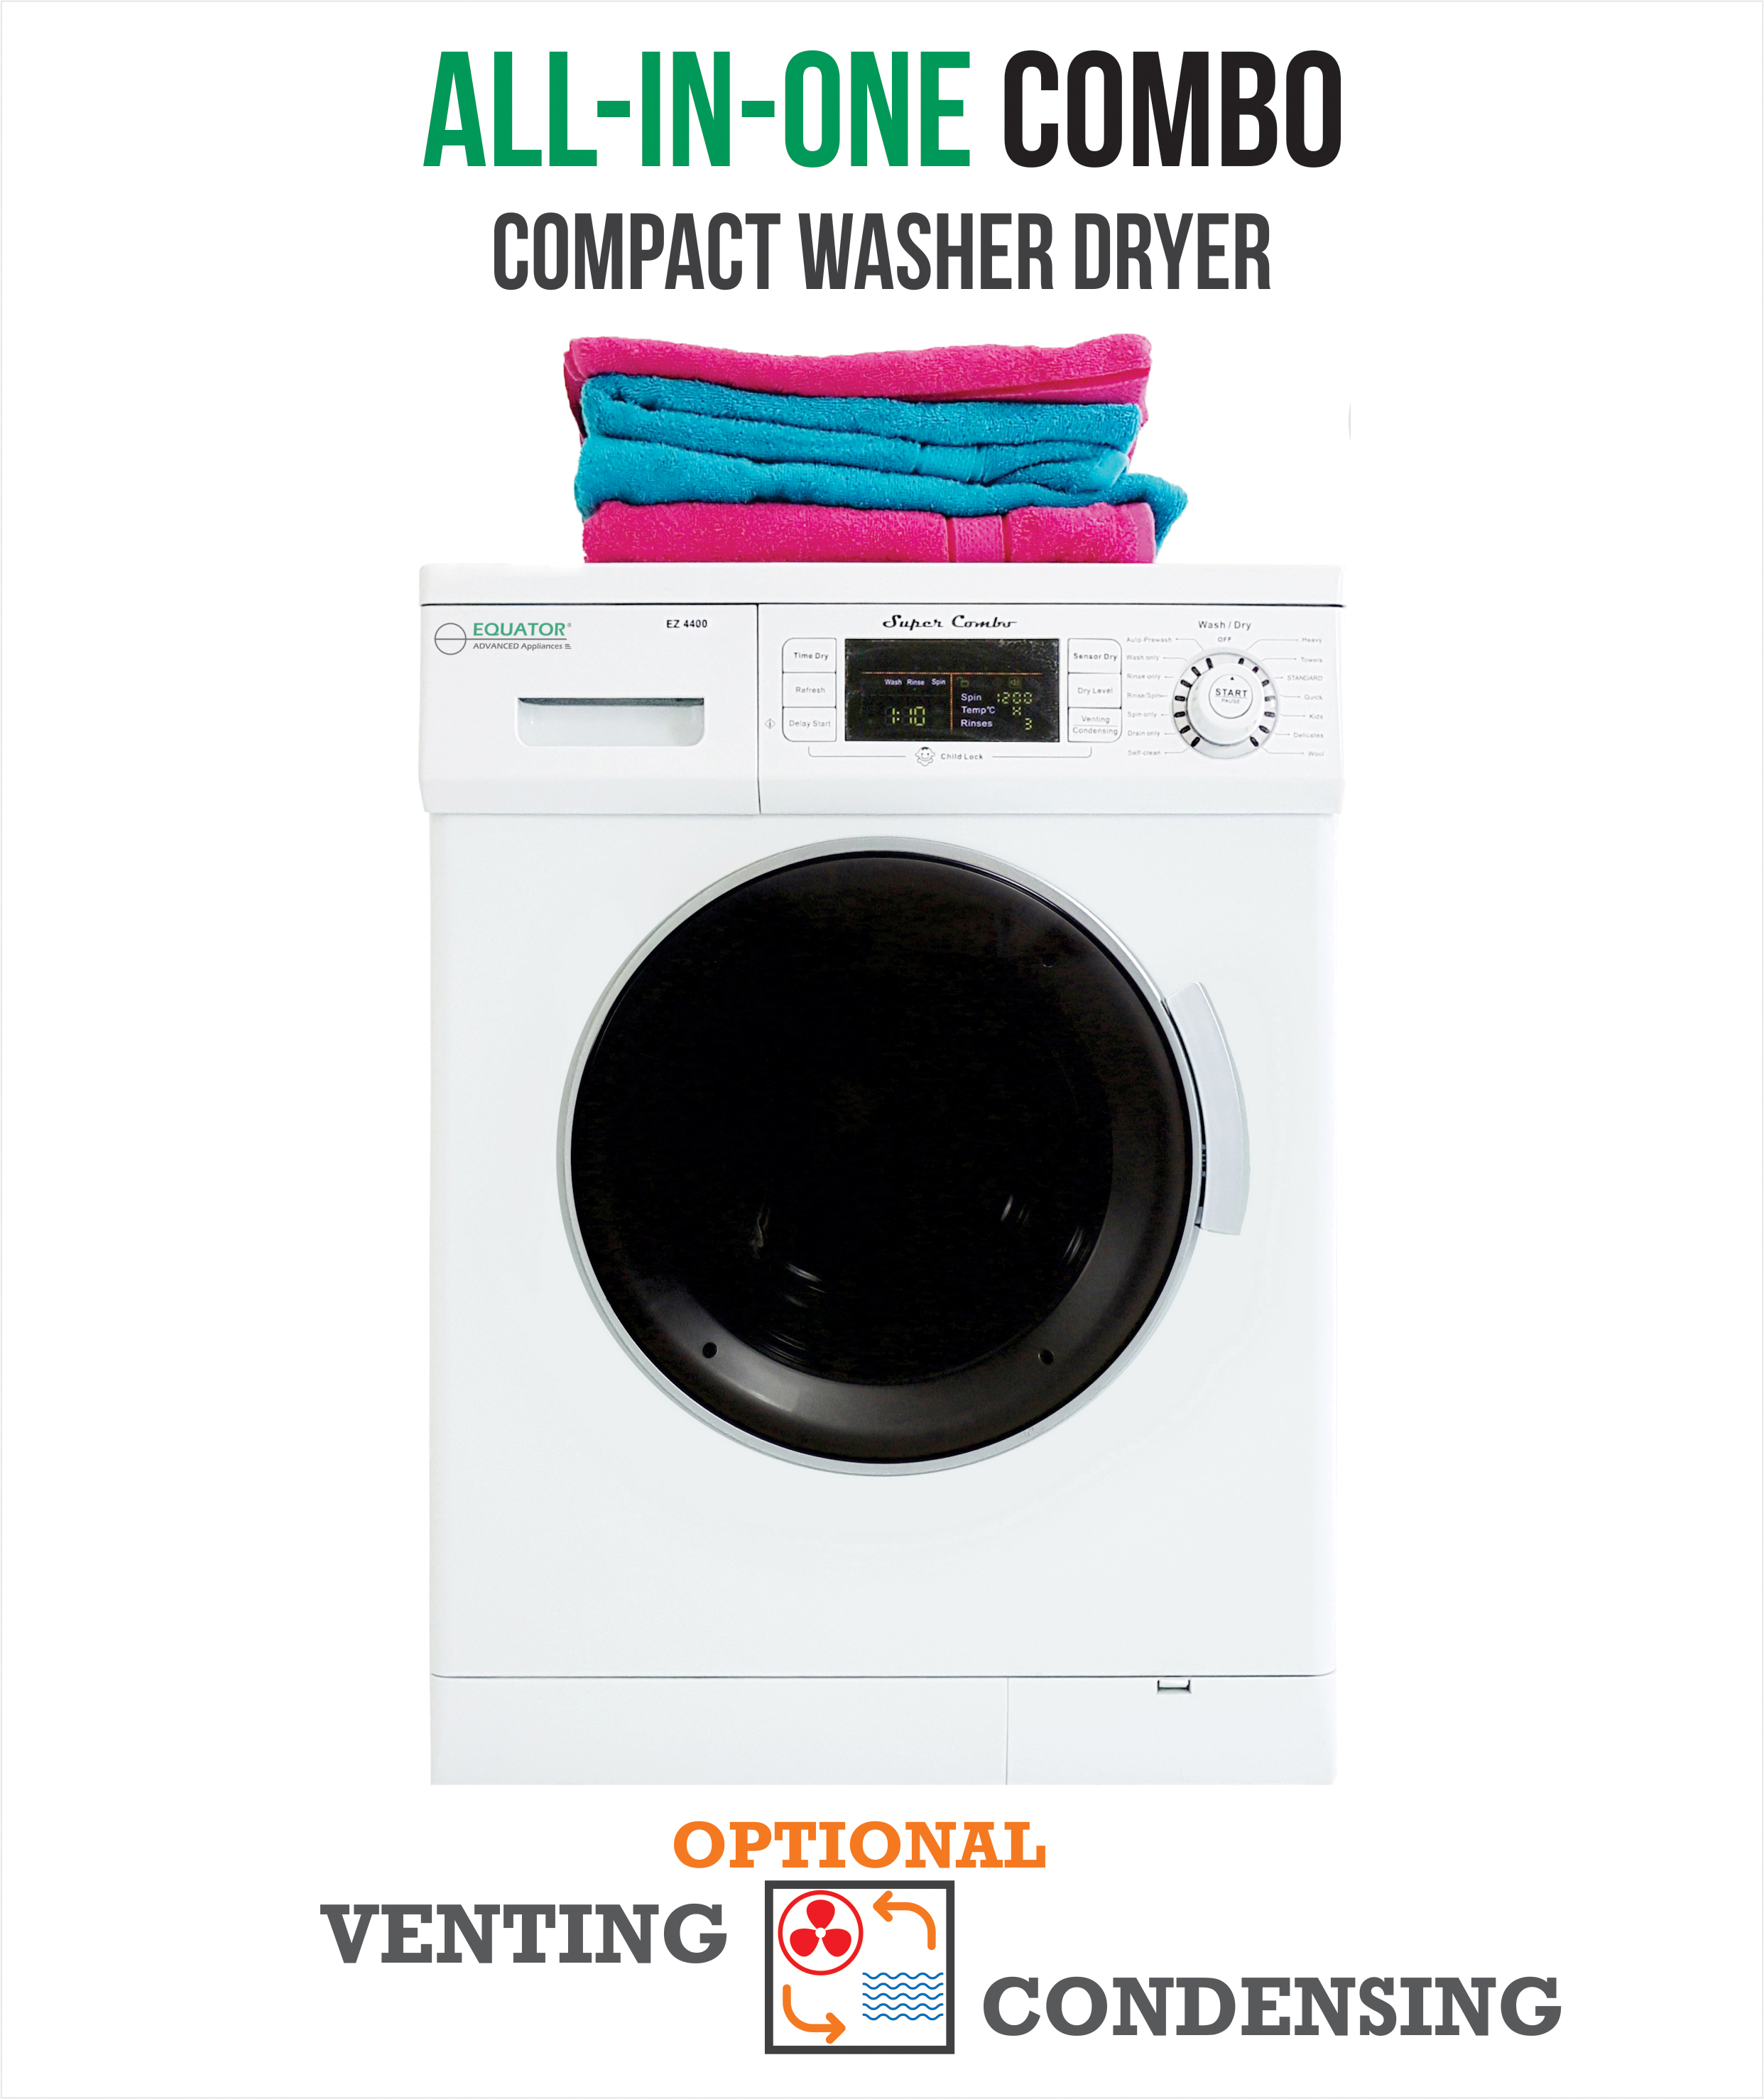 All-in-one 13 Lb. 1200 Rpm Compact Combo Washer Dryer With Optional Condensing/ Venting Sensor Dry Auto Water Level